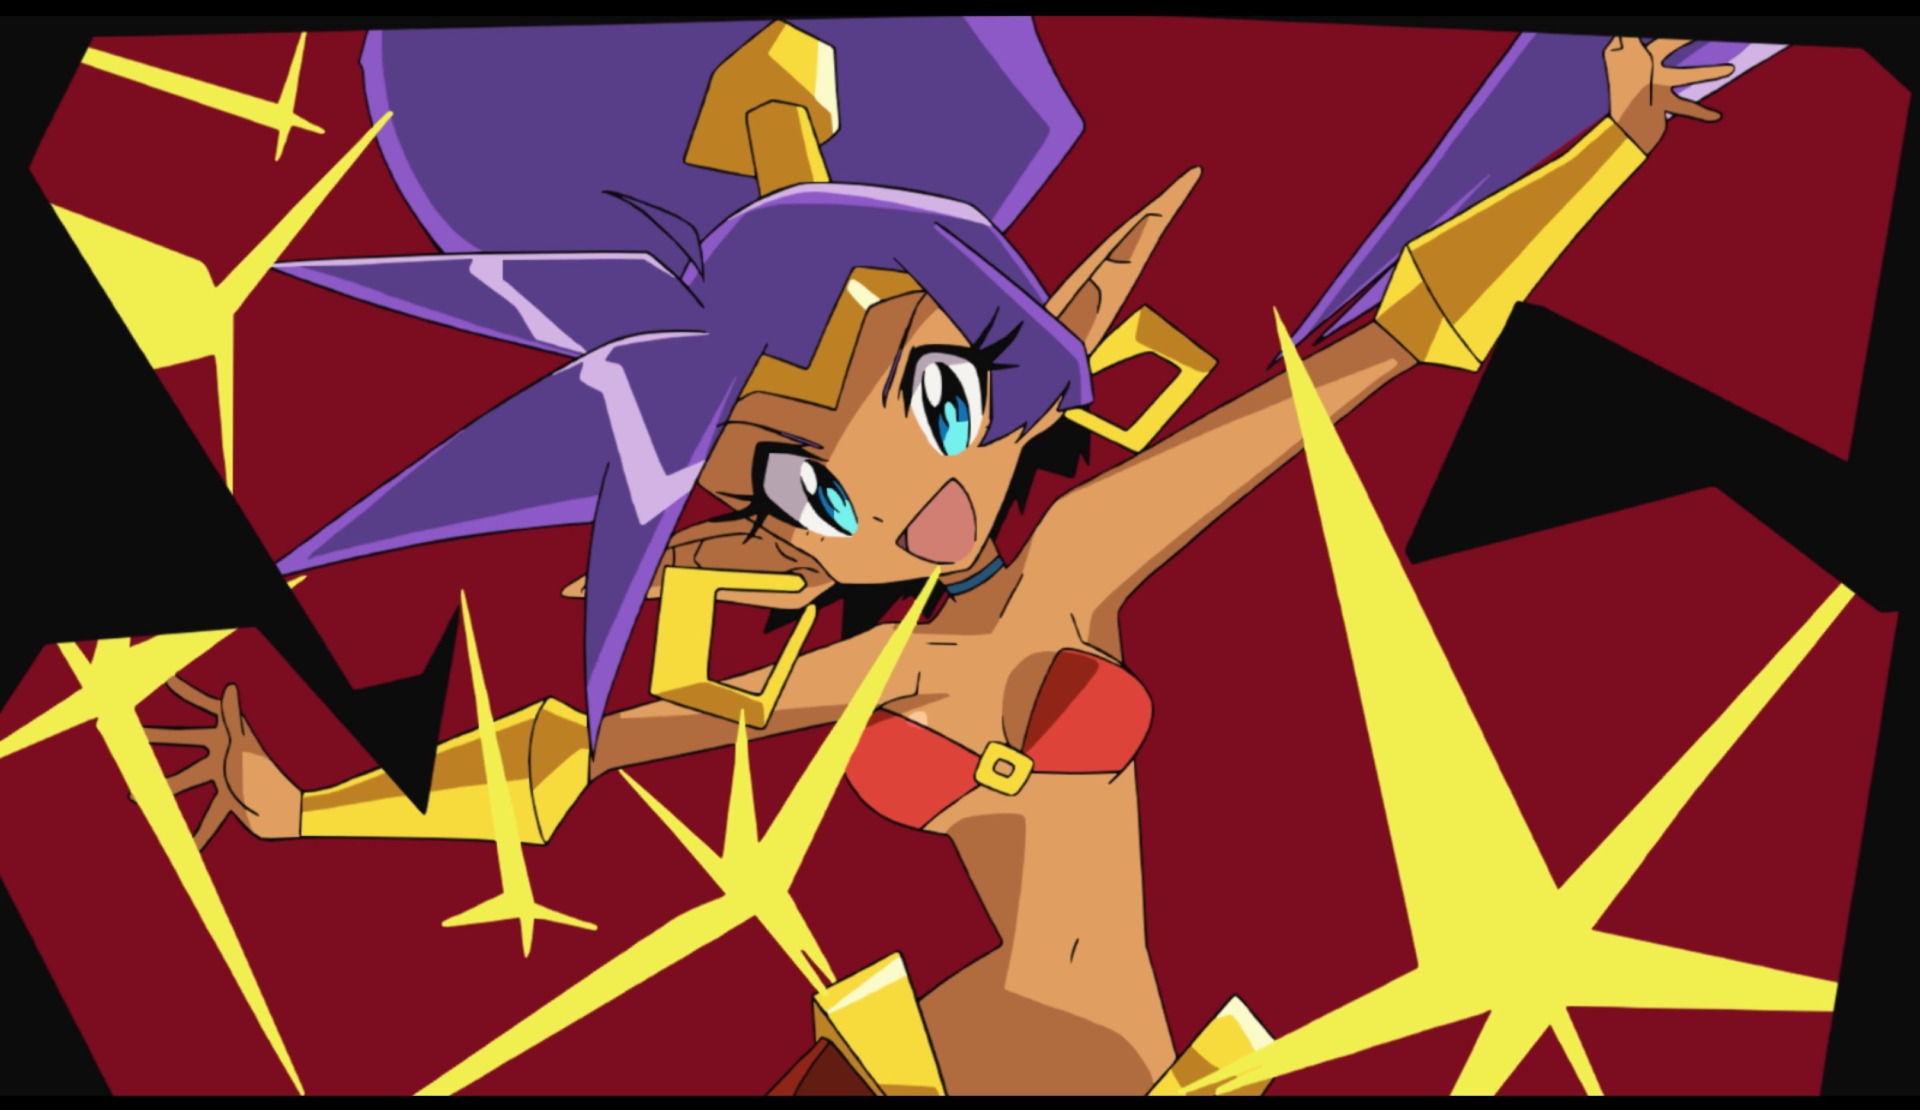 Shantae and the Seven Sirens Release Date Is May 28, 2020